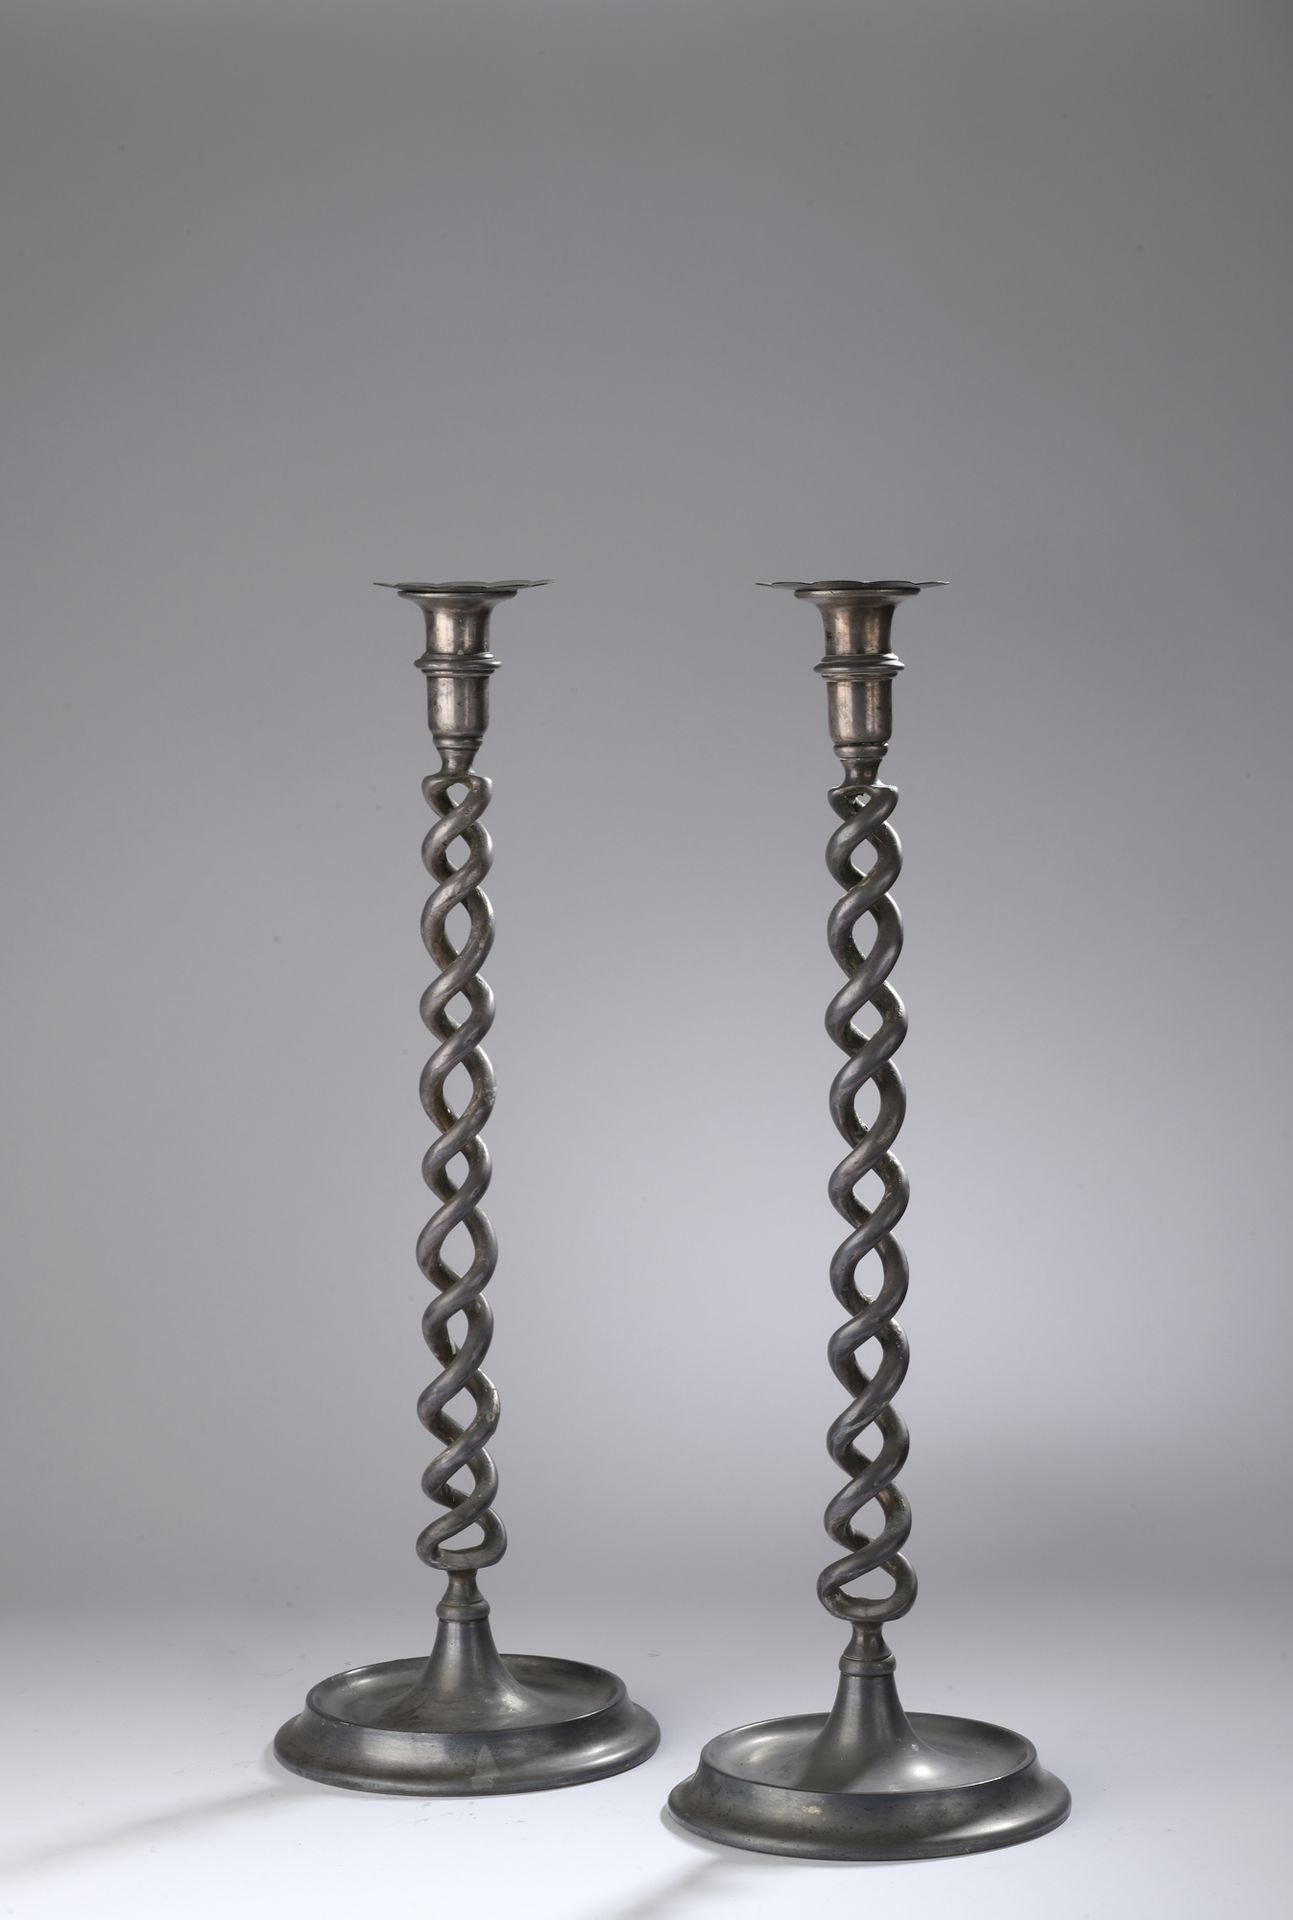 Null Twentieth-century work.
Curious PAIR OF LARGE CANDLES in silver-plated meta&hellip;